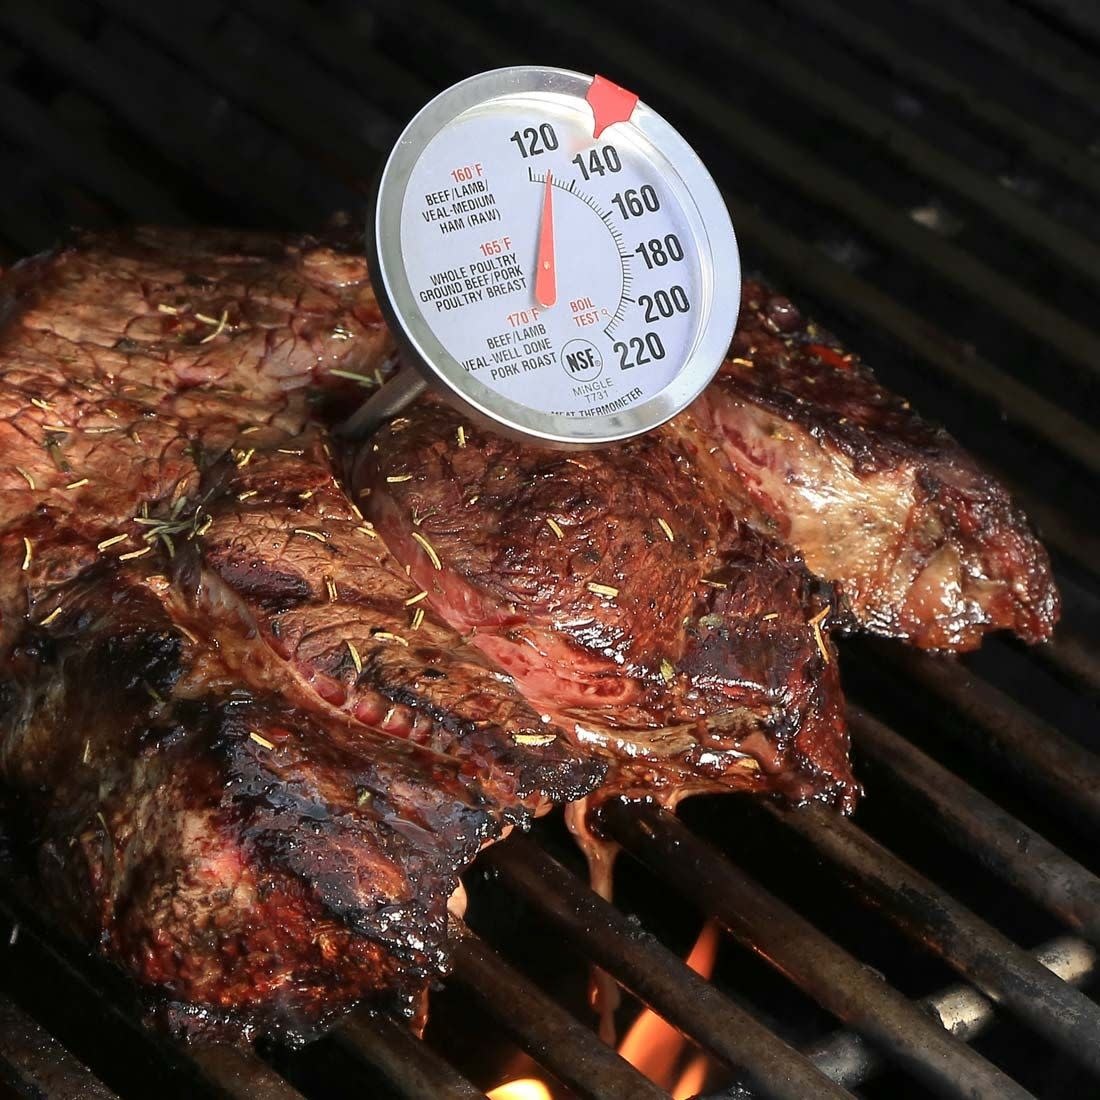 Oven Safe Meat Thermometer